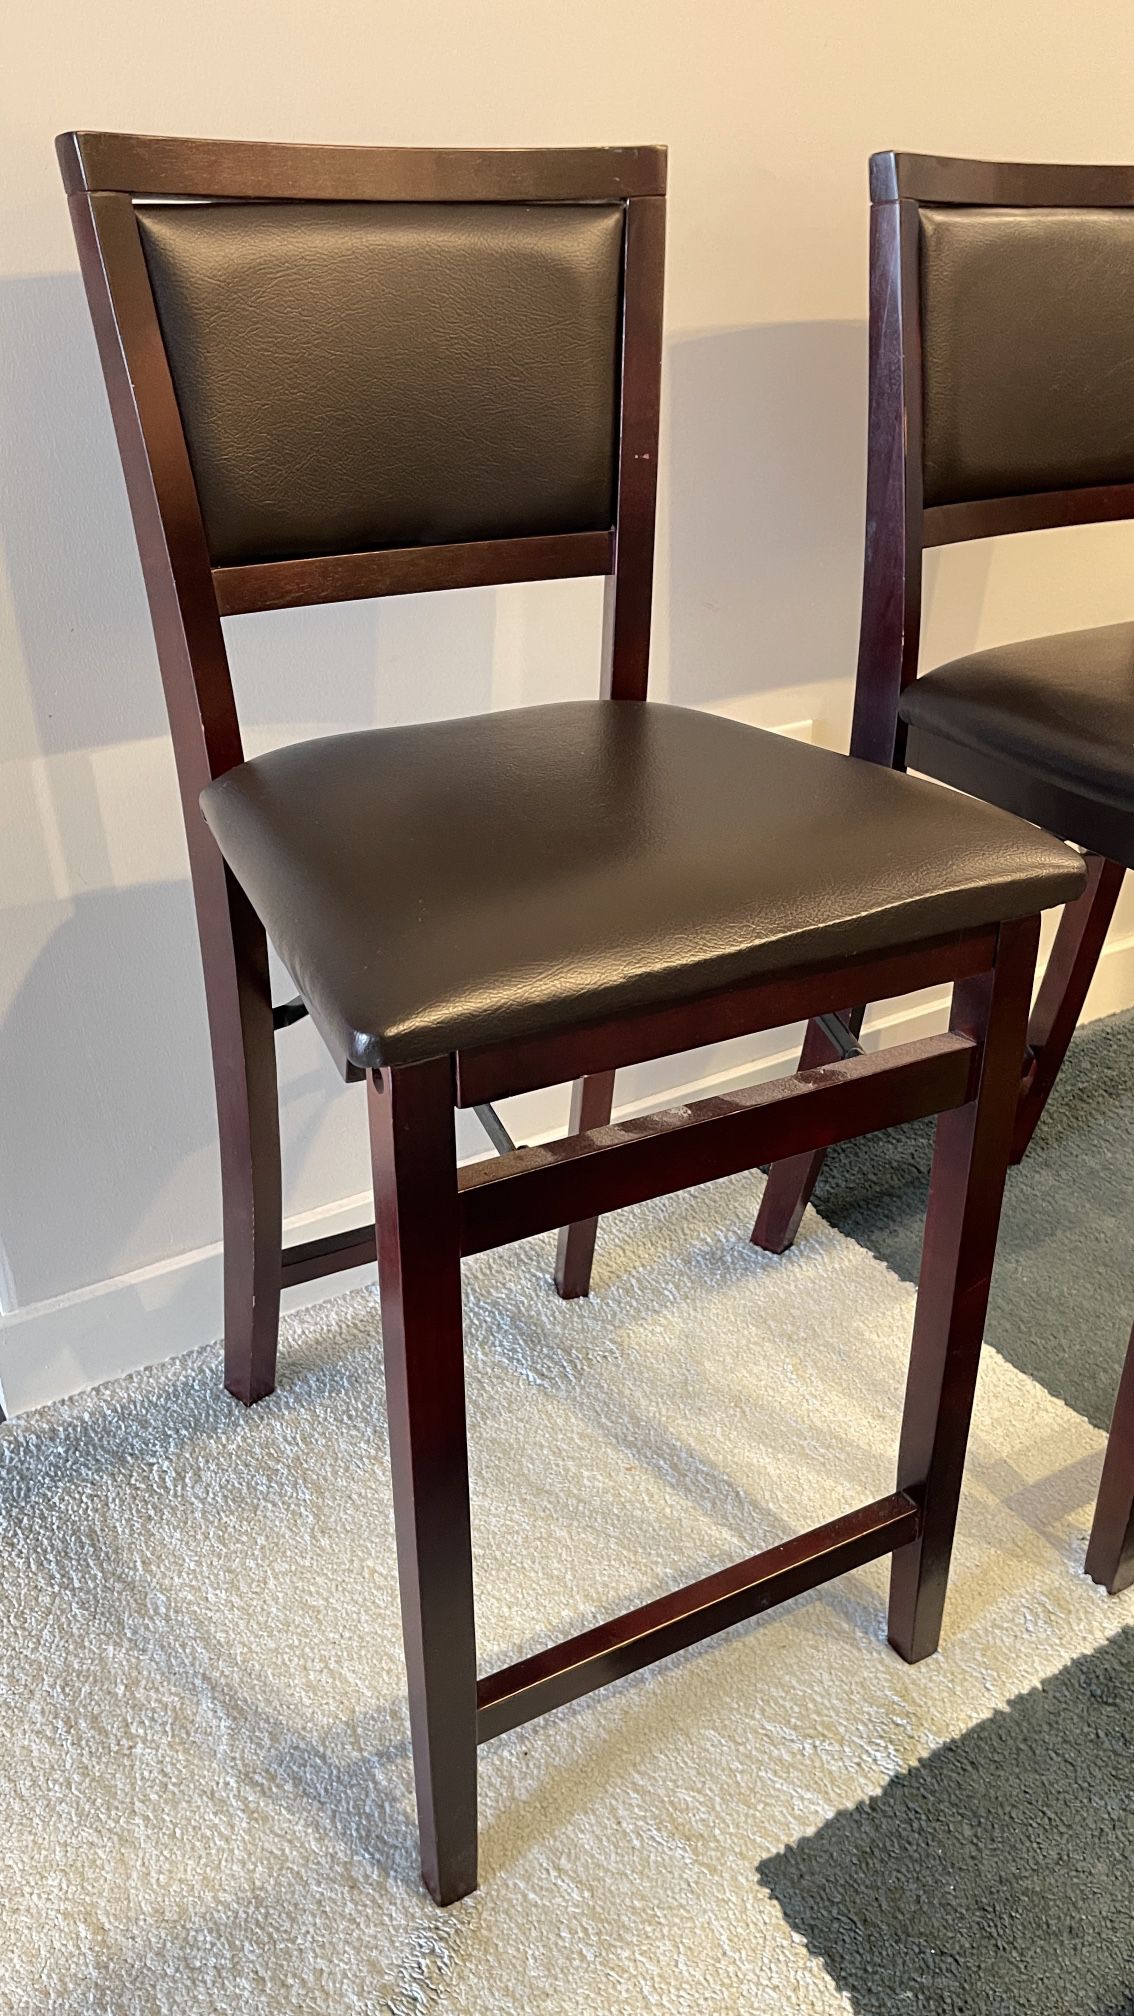 Back Folding Counter Stool, 24-Inch ($20 each)